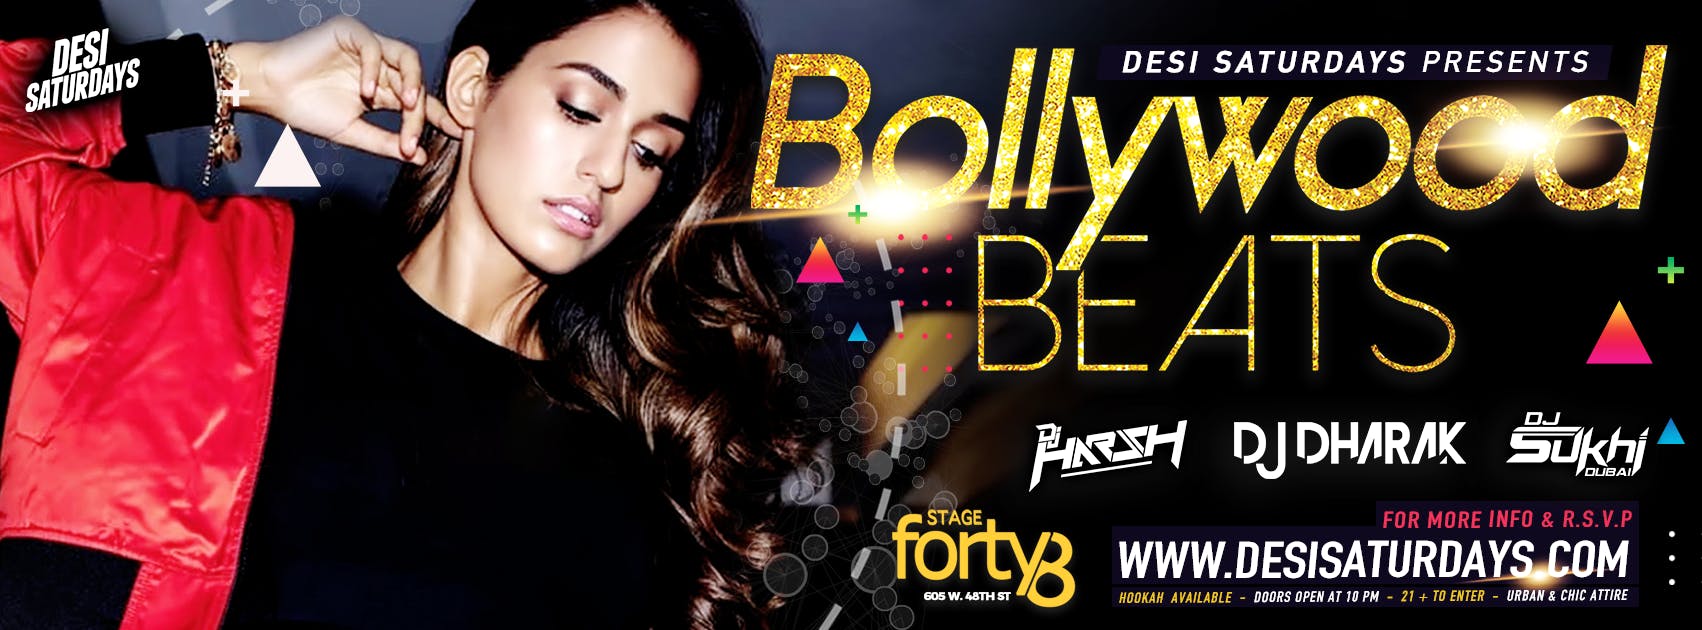 Bollywood Beats @ Stage48 NYC - A Weekly Saturday Night DesiParty 